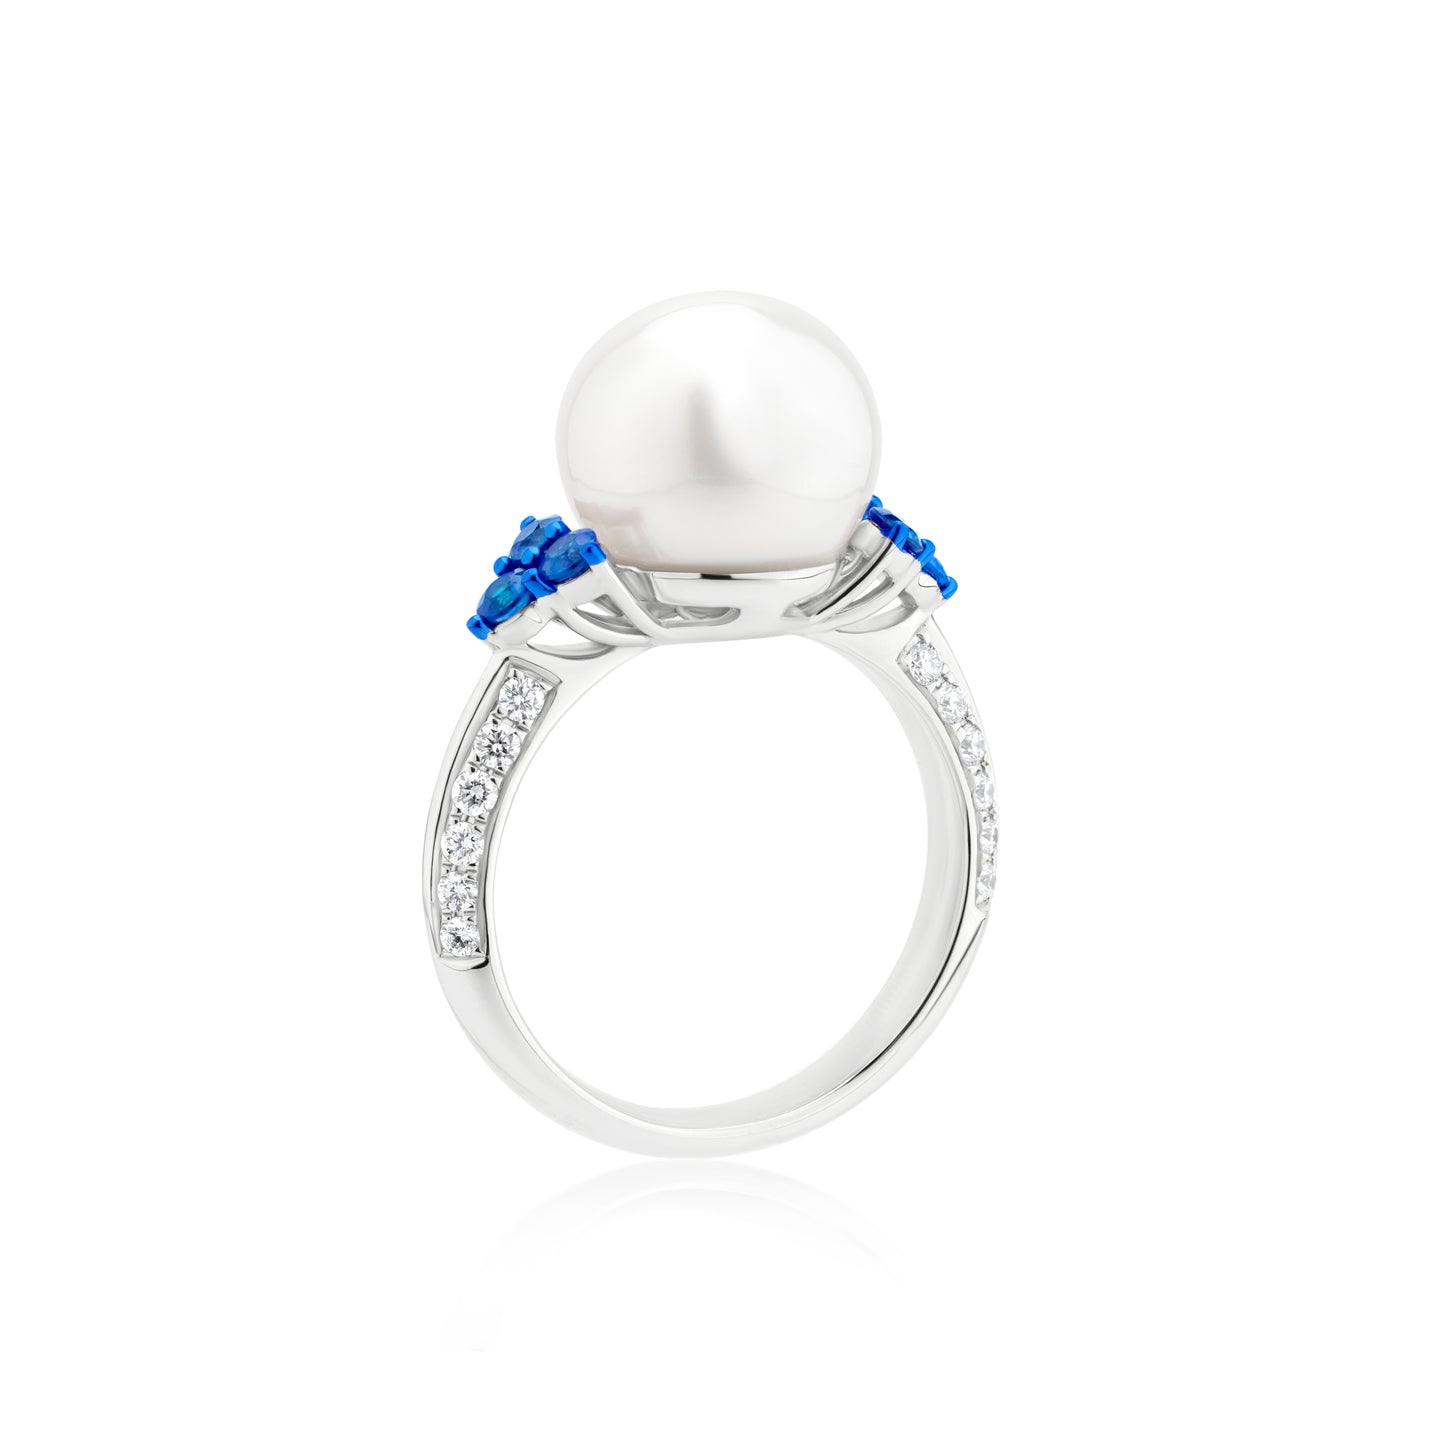 Ring With Pearl,Sapphire And Diamond In 18K White Gold And Blue Rhodium